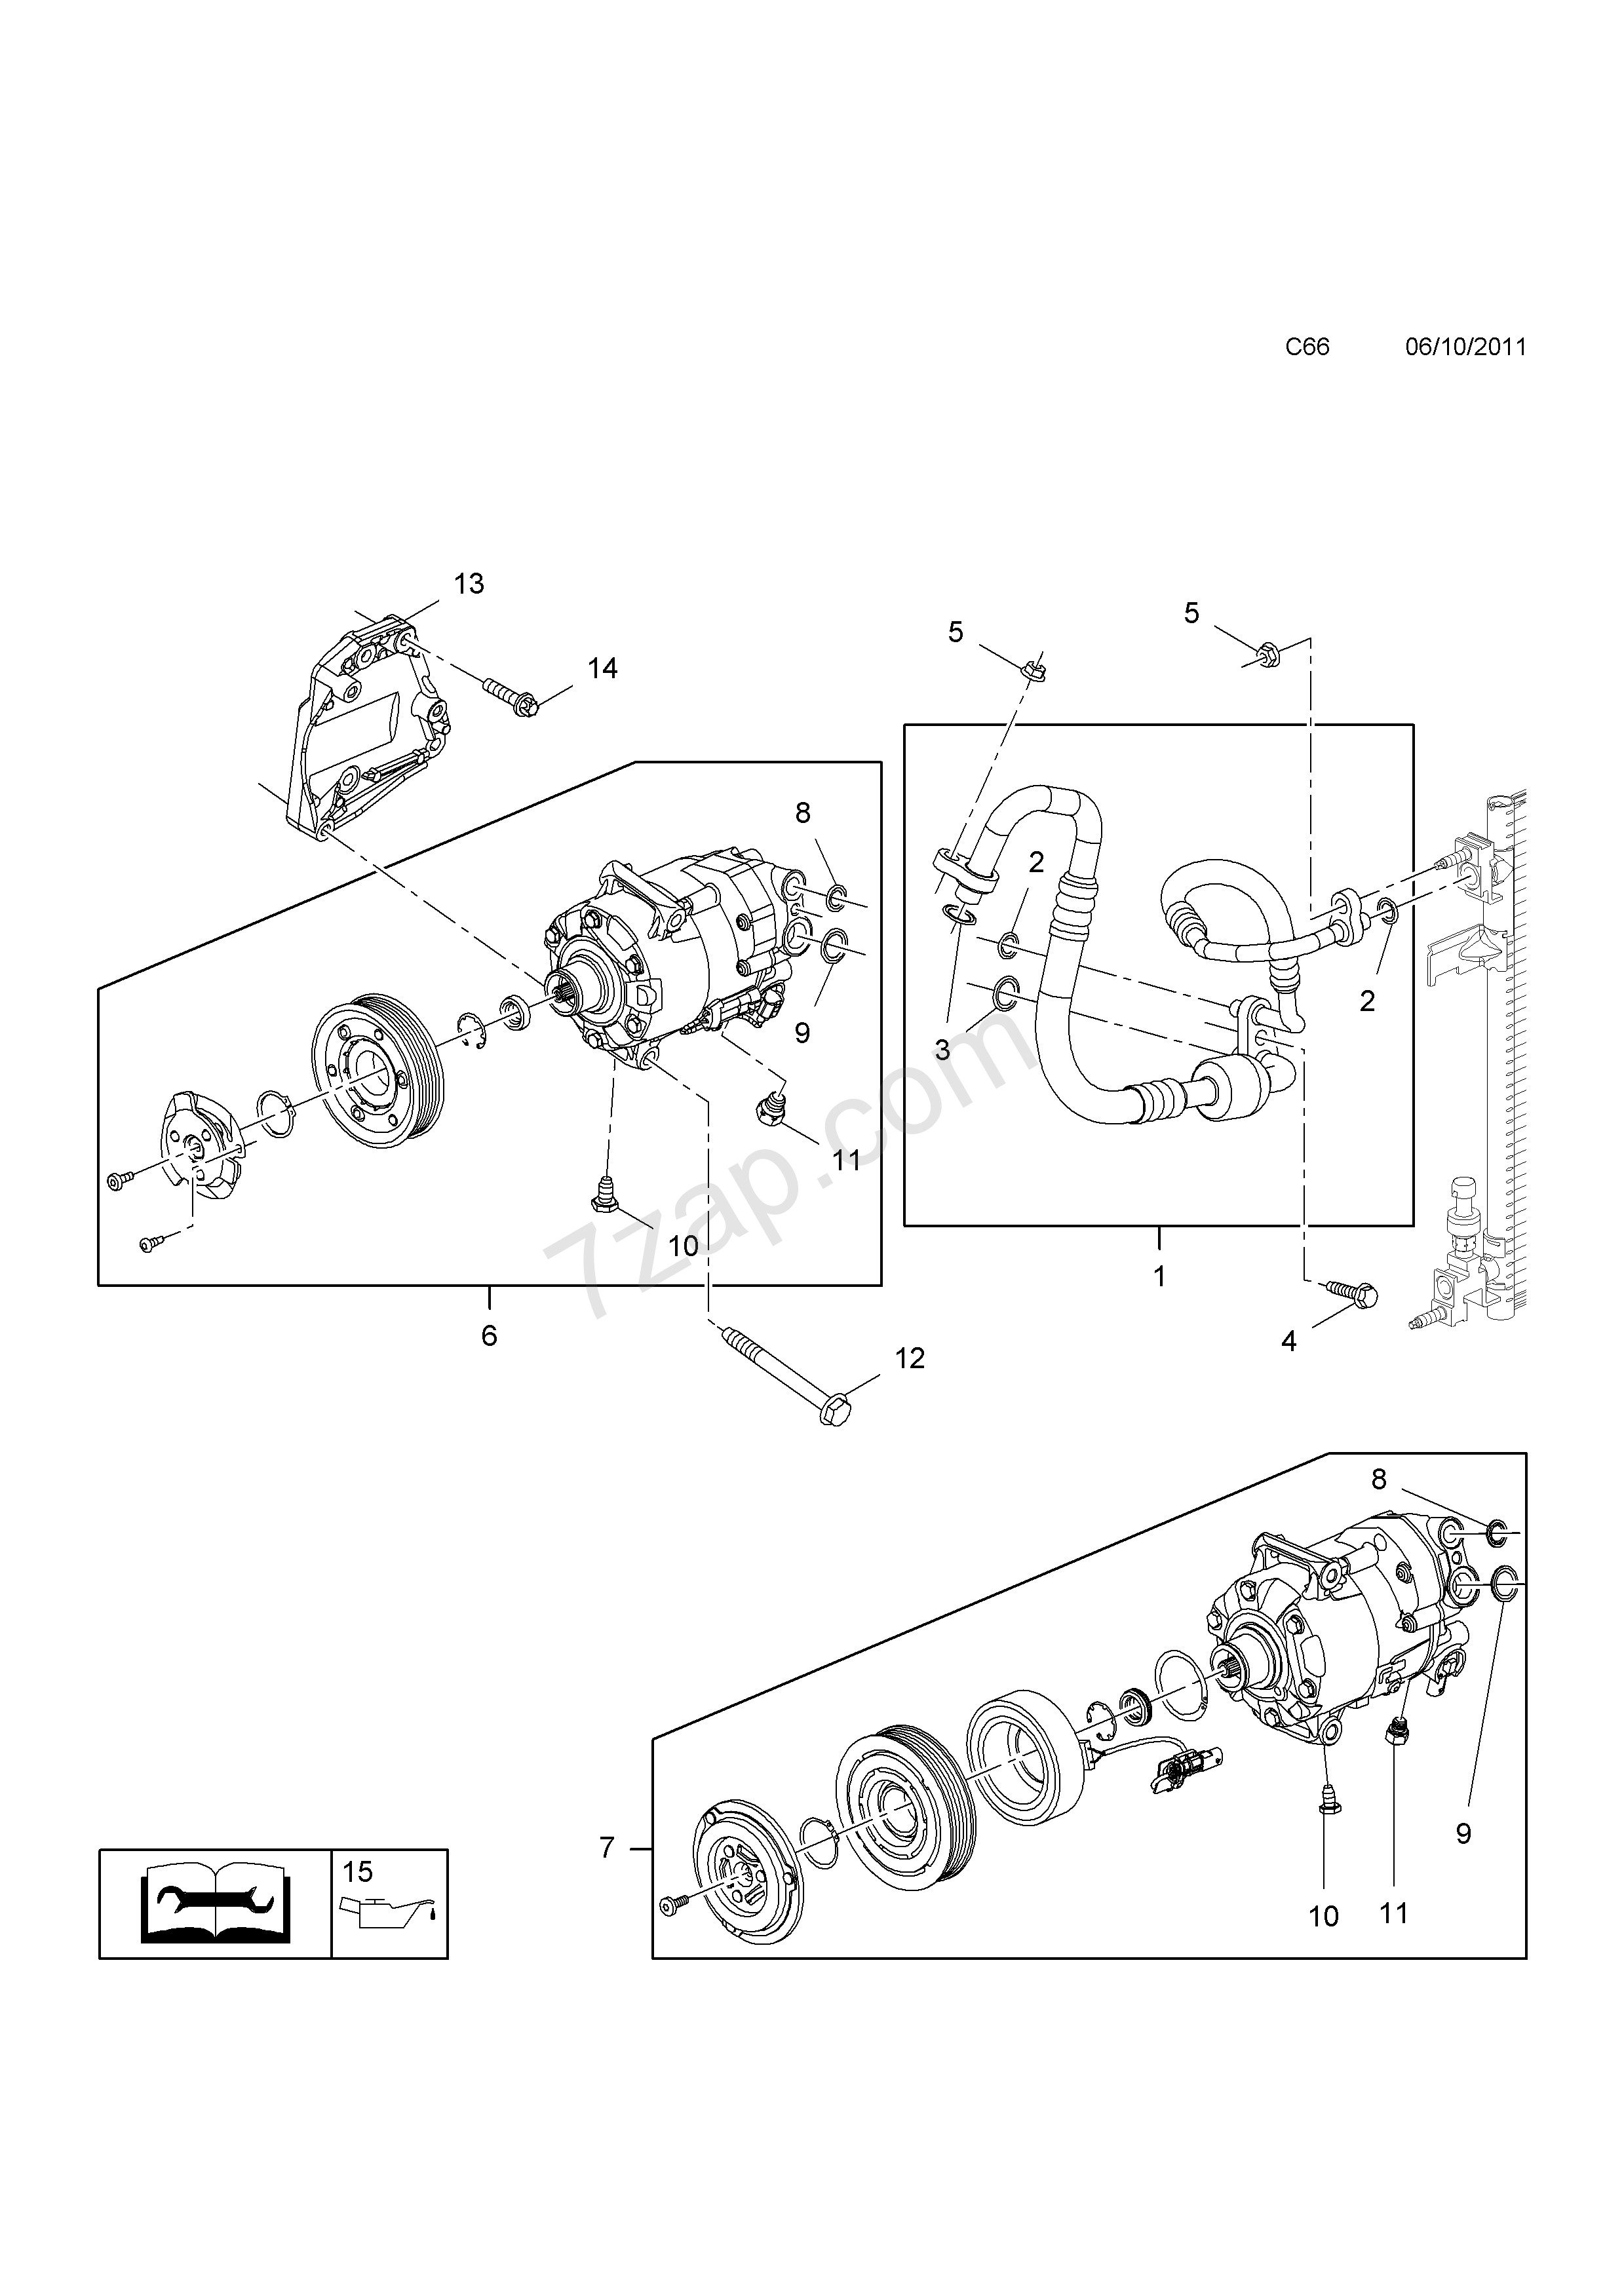 Vauxhall astra Engine Diagram Pressor and Fittings [a13dte[lsf] Diesel Engine] Opel astra J Of Vauxhall astra Engine Diagram